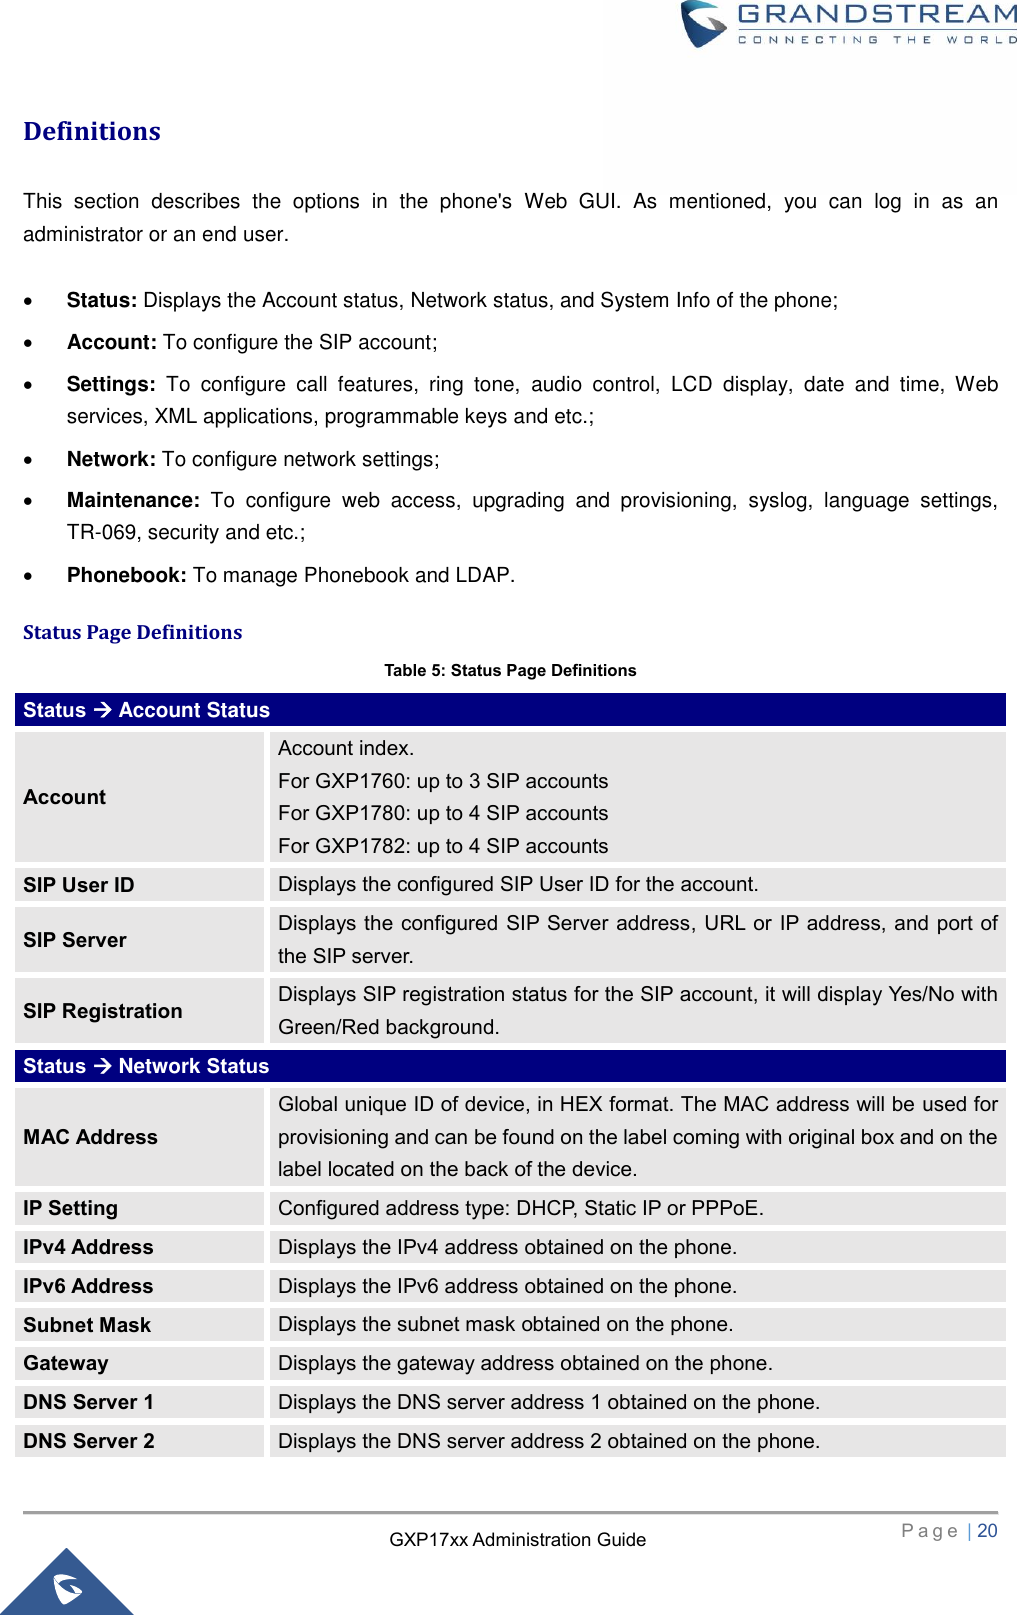   P a g e  | 20       GXP17xx Administration Guide Definitions  This  section  describes  the  options  in  the  phone&apos;s  Web  GUI.  As  mentioned,  you  can  log  in  as  an administrator or an end user.   Status: Displays the Account status, Network status, and System Info of the phone;  Account: To configure the SIP account;  Settings:  To  configure  call  features,  ring  tone,  audio  control,  LCD  display,  date  and  time,  Web services, XML applications, programmable keys and etc.;  Network: To configure network settings;  Maintenance:  To  configure  web  access,  upgrading  and  provisioning,  syslog,  language  settings, TR-069, security and etc.;  Phonebook: To manage Phonebook and LDAP. Status Page Definitions Table 5: Status Page Definitions Status  Account Status Account Account index.   For GXP1760: up to 3 SIP accounts For GXP1780: up to 4 SIP accounts For GXP1782: up to 4 SIP accounts SIP User ID Displays the configured SIP User ID for the account. SIP Server Displays the configured SIP Server address, URL or IP address, and port of the SIP server. SIP Registration Displays SIP registration status for the SIP account, it will display Yes/No with Green/Red background. Status  Network Status MAC Address Global unique ID of device, in HEX format. The MAC address will be used for provisioning and can be found on the label coming with original box and on the label located on the back of the device. IP Setting Configured address type: DHCP, Static IP or PPPoE. IPv4 Address Displays the IPv4 address obtained on the phone. IPv6 Address Displays the IPv6 address obtained on the phone. Subnet Mask Displays the subnet mask obtained on the phone. Gateway Displays the gateway address obtained on the phone. DNS Server 1 Displays the DNS server address 1 obtained on the phone. DNS Server 2 Displays the DNS server address 2 obtained on the phone. 